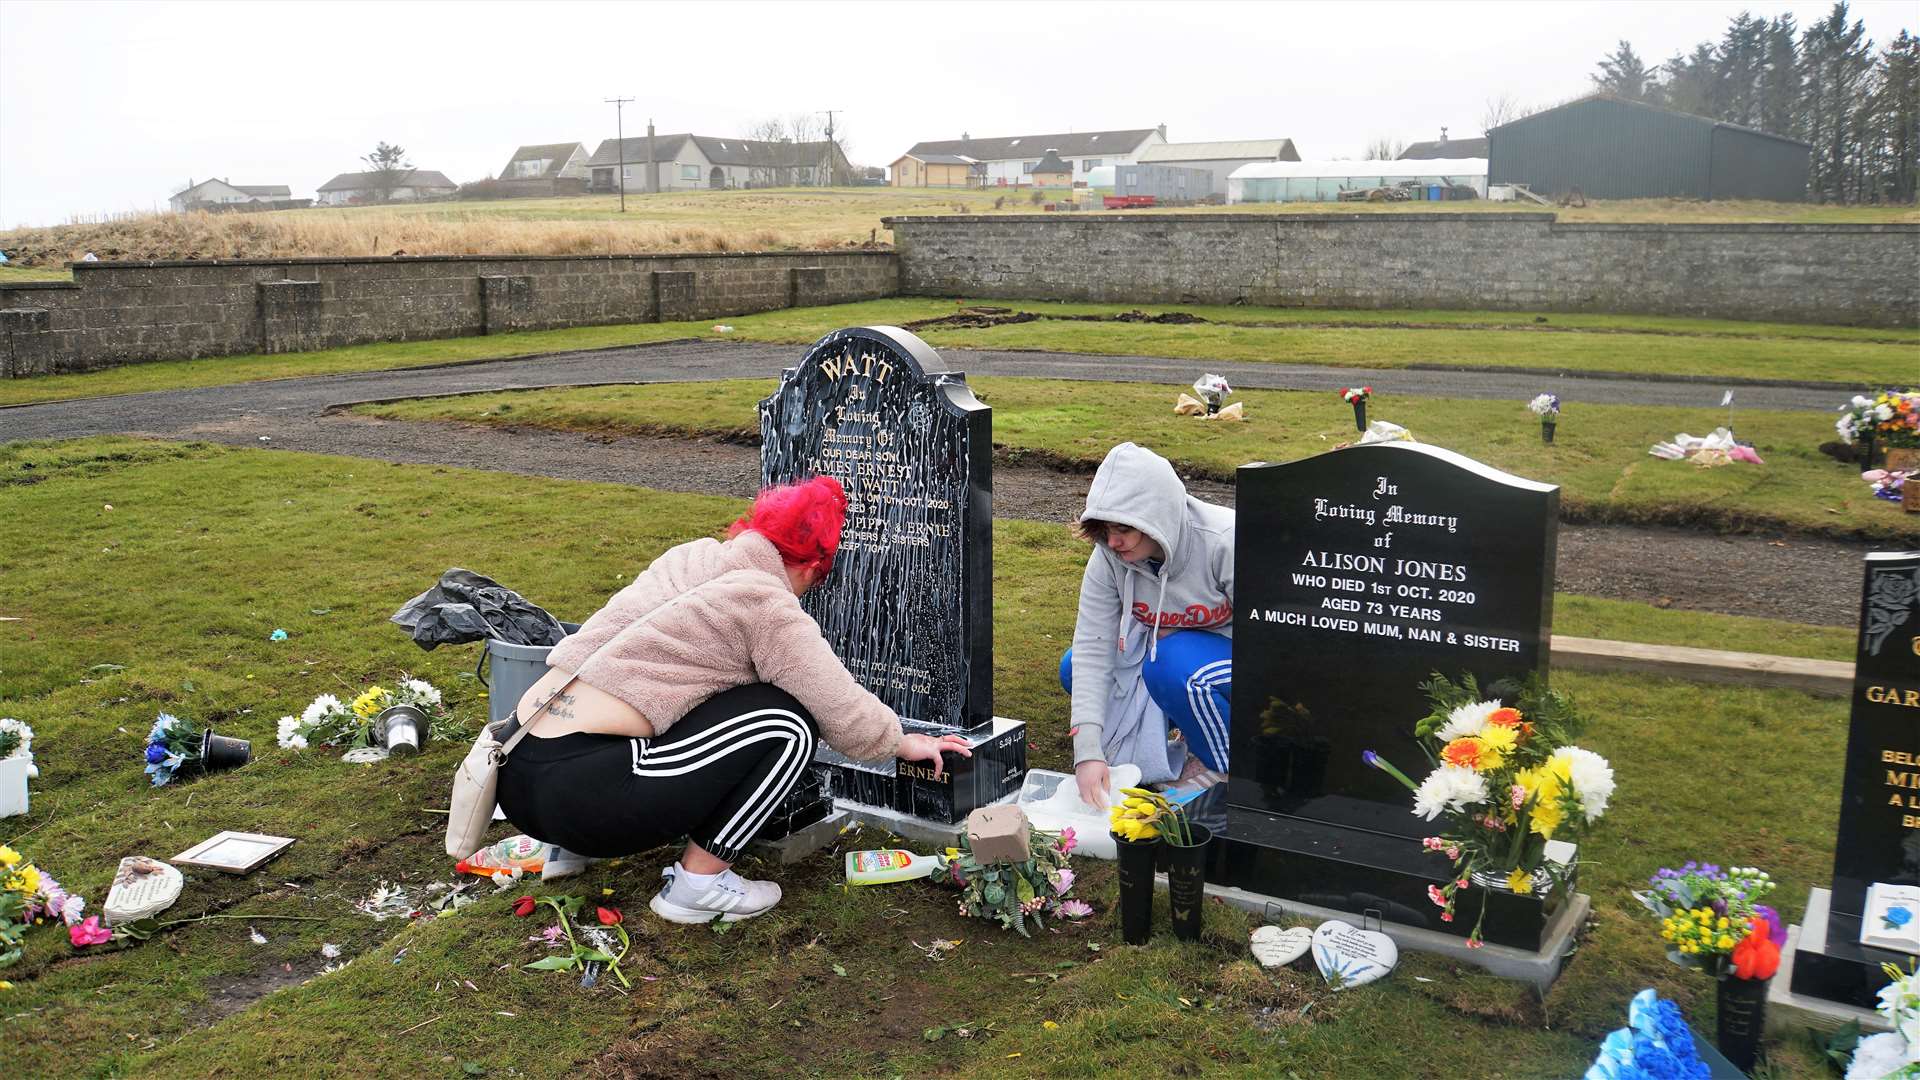 James Watt's sisters remove the white paint from his gravestone this afternoon at Wick cemetery. An empty paint can was found over the wall behind them in a neighbouring field. No other gravestones appear damaged. Pictures: DGS